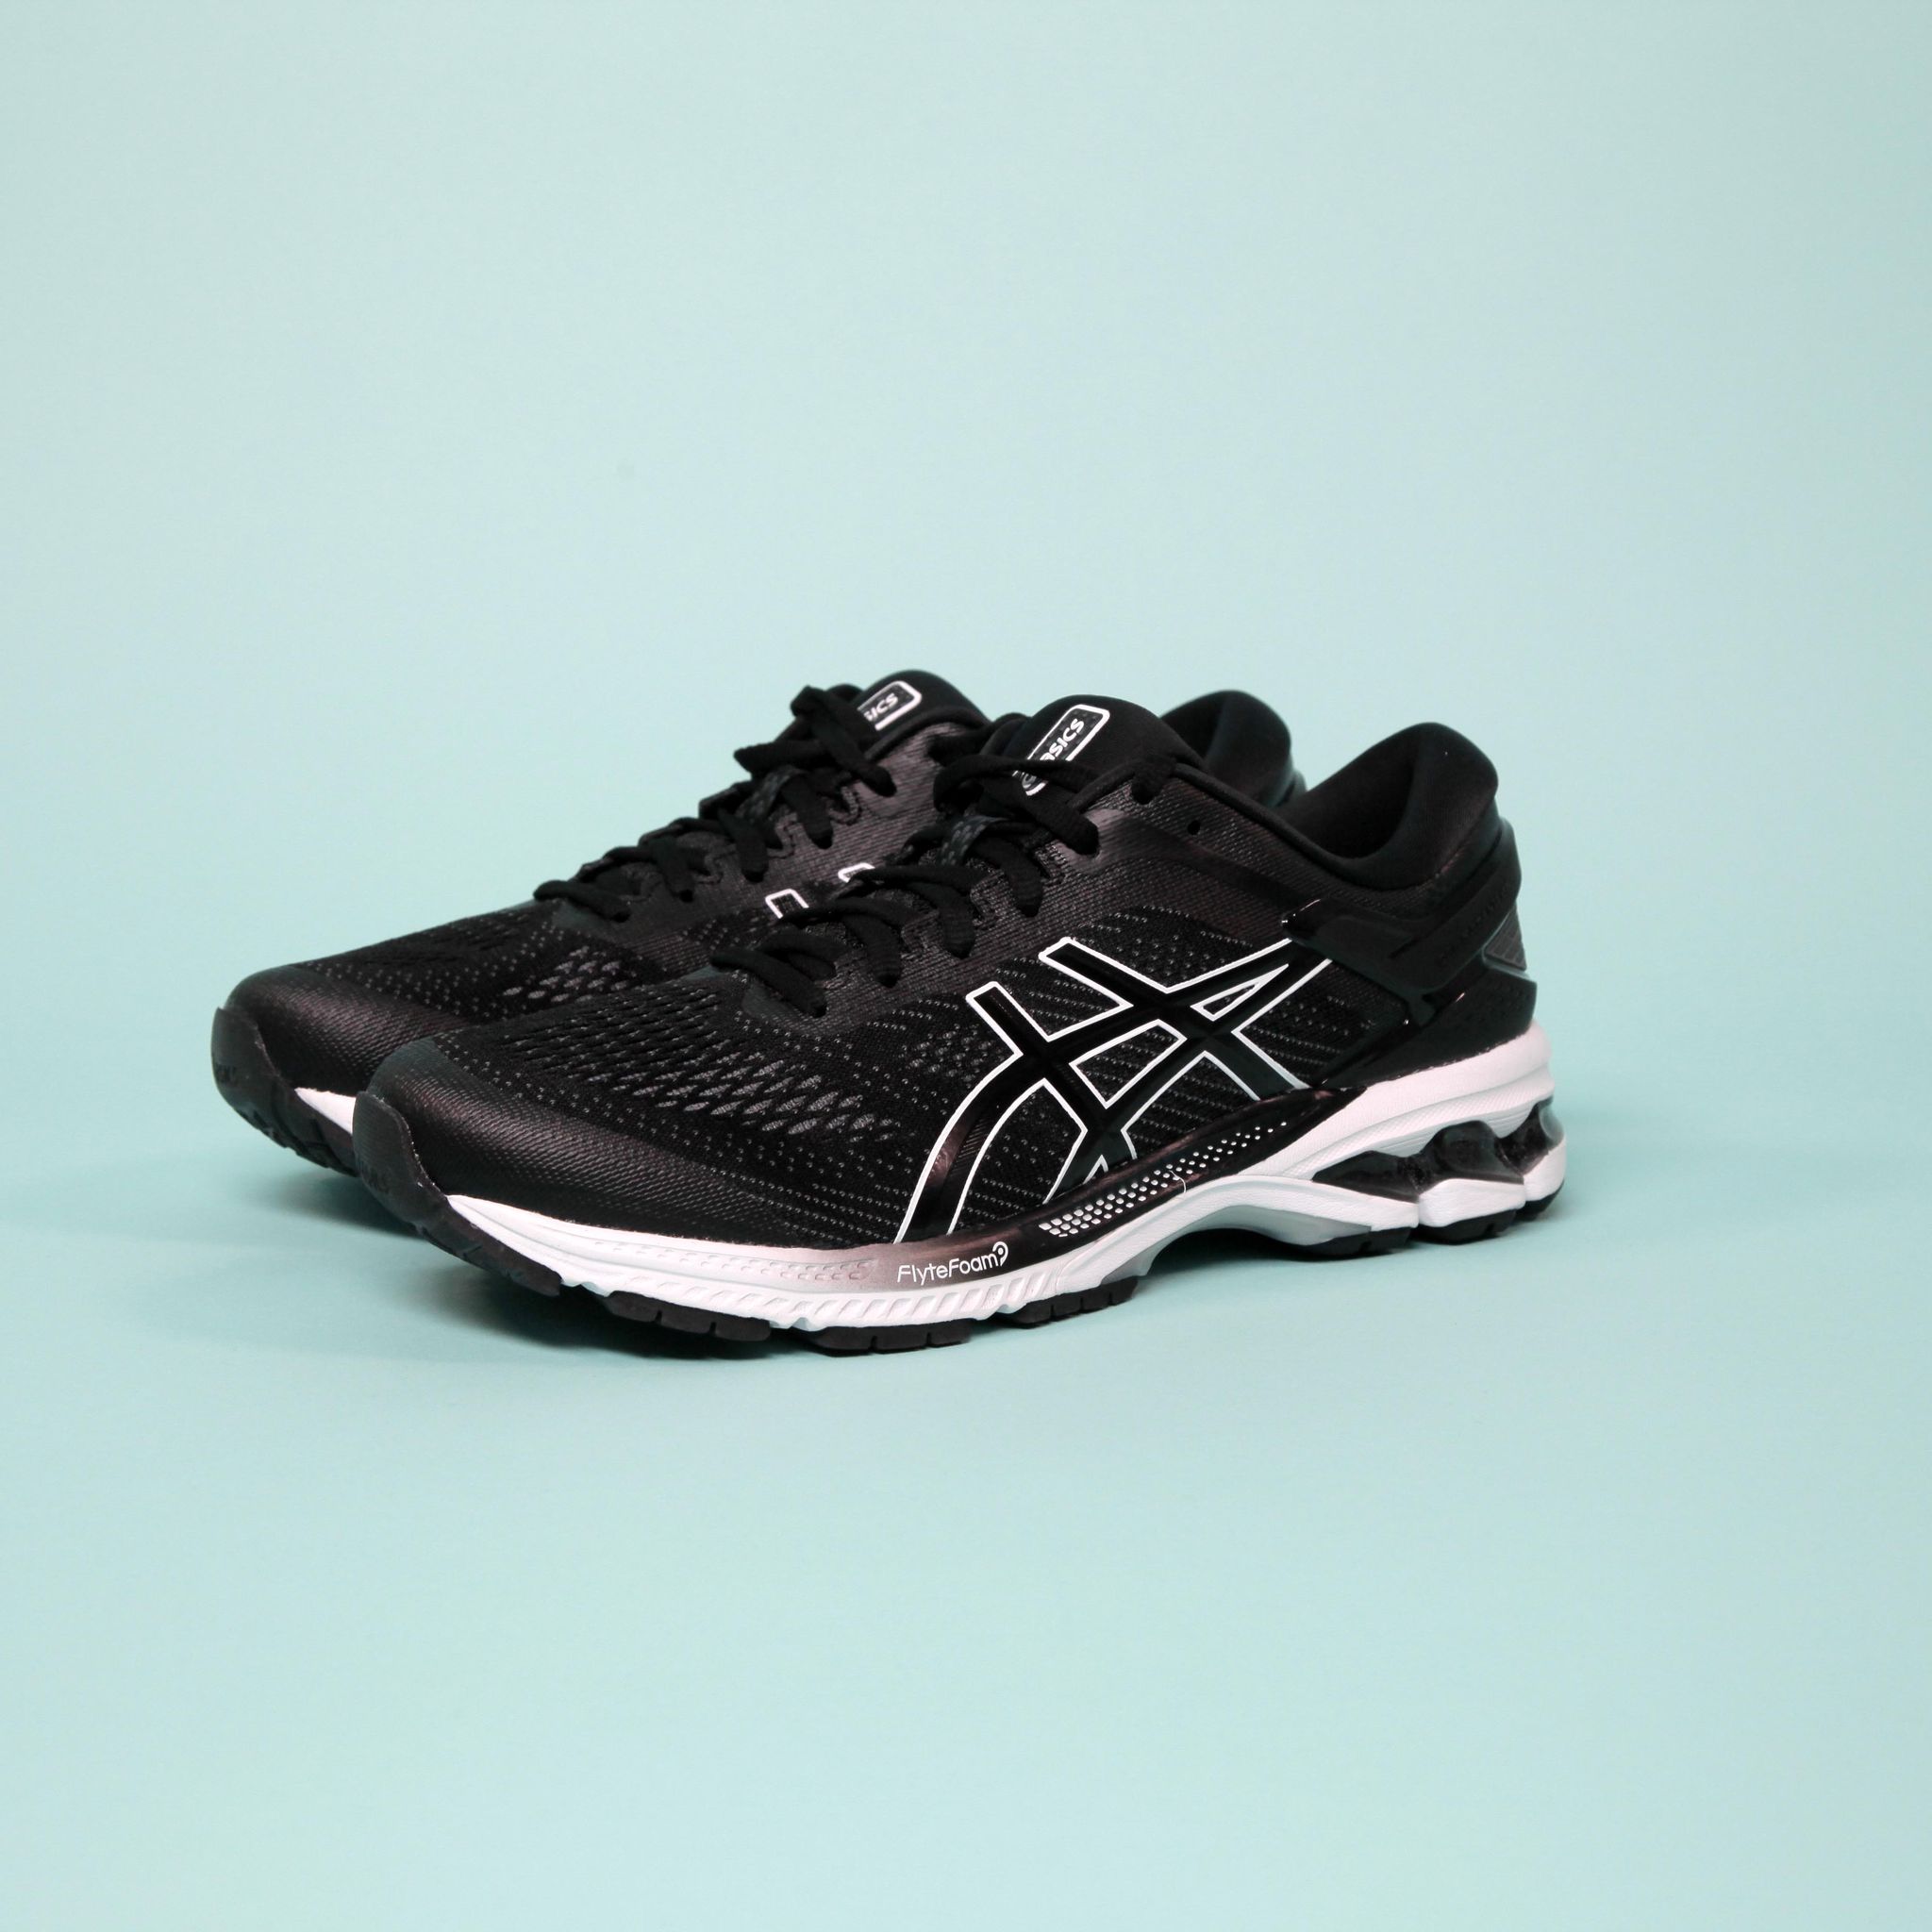 The Asics Gel Kayano 26 is a reliable shoe for overpronators for whom ...